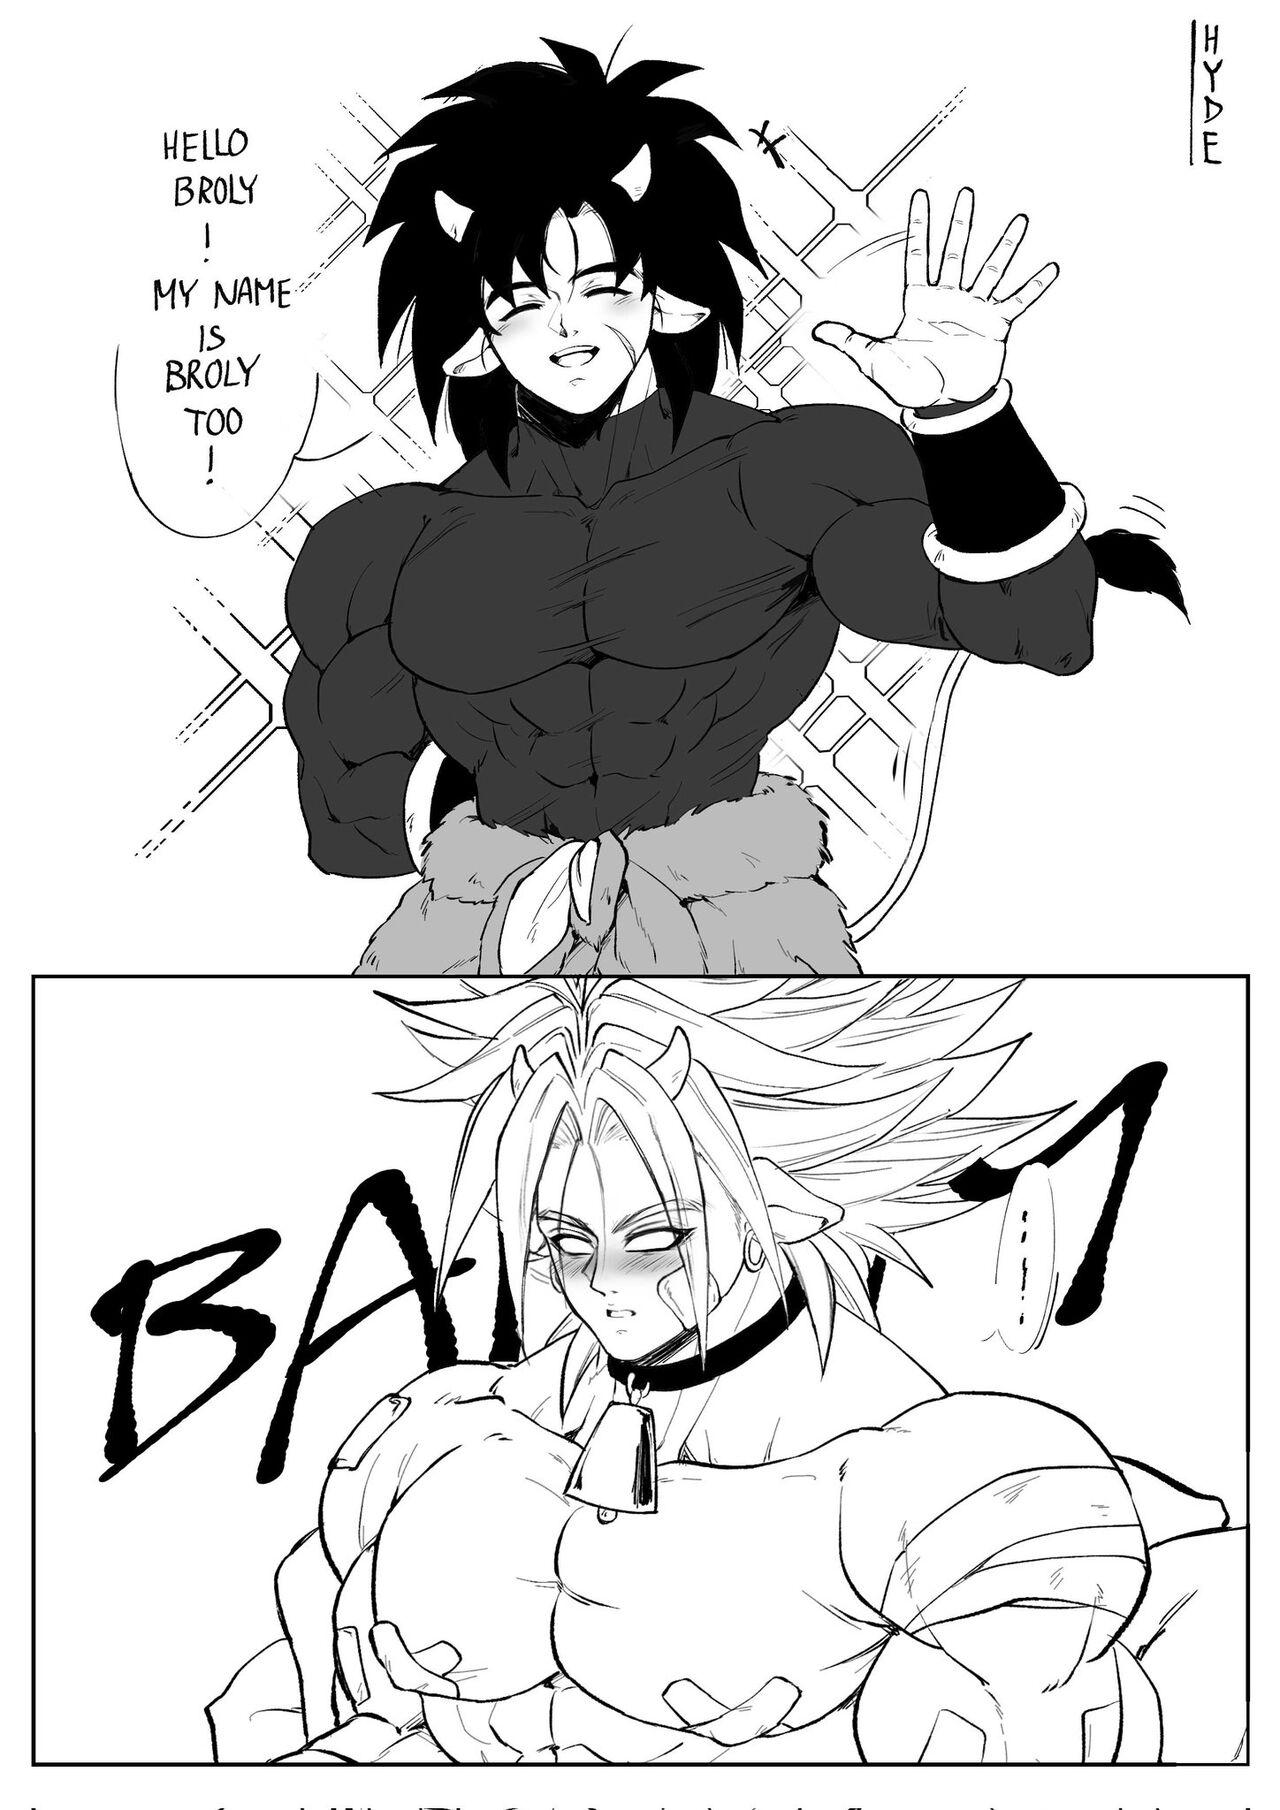 Cow broly 12